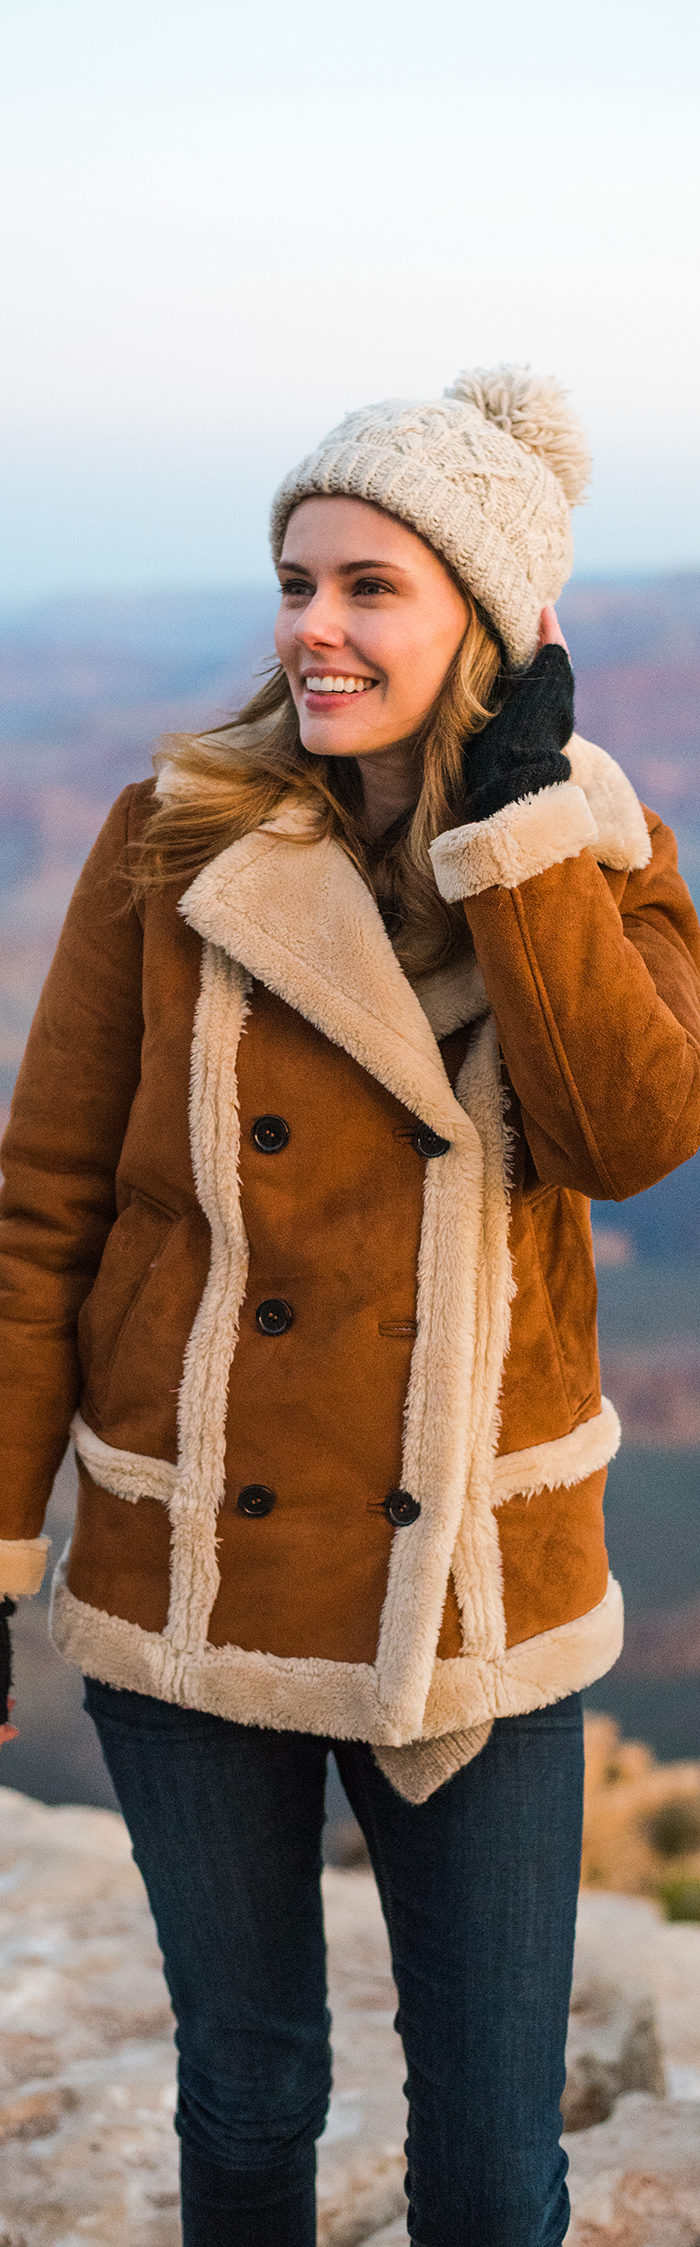 Miss USA 2011 Alyssa Campanella of The A List blog visits the Grand Canyon in Arizona wearing Topshop faux shearling coat